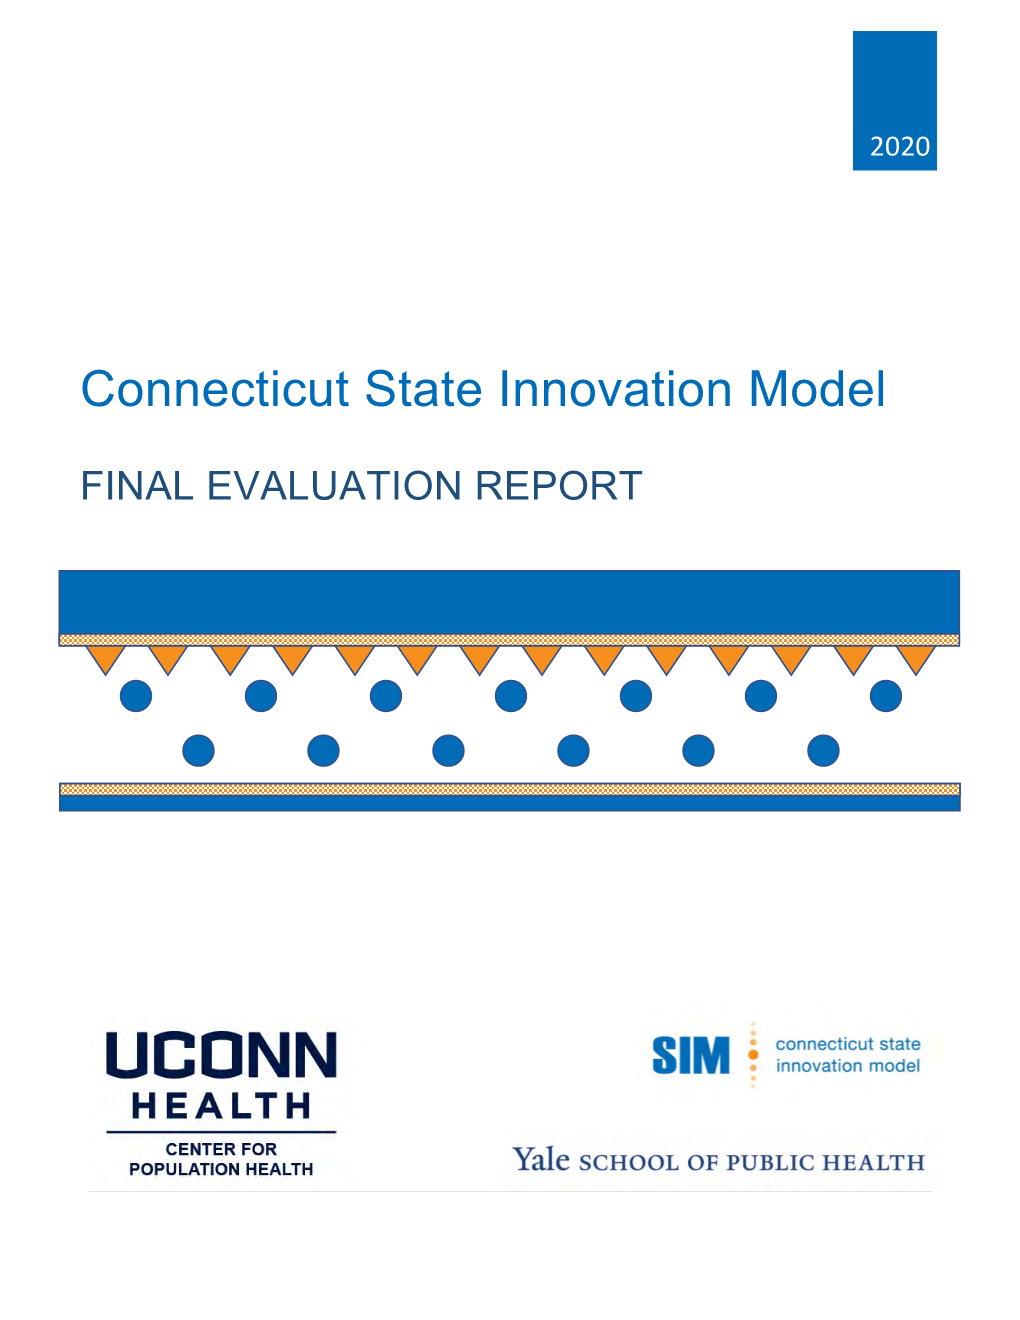 Connecticut State Innovation Model